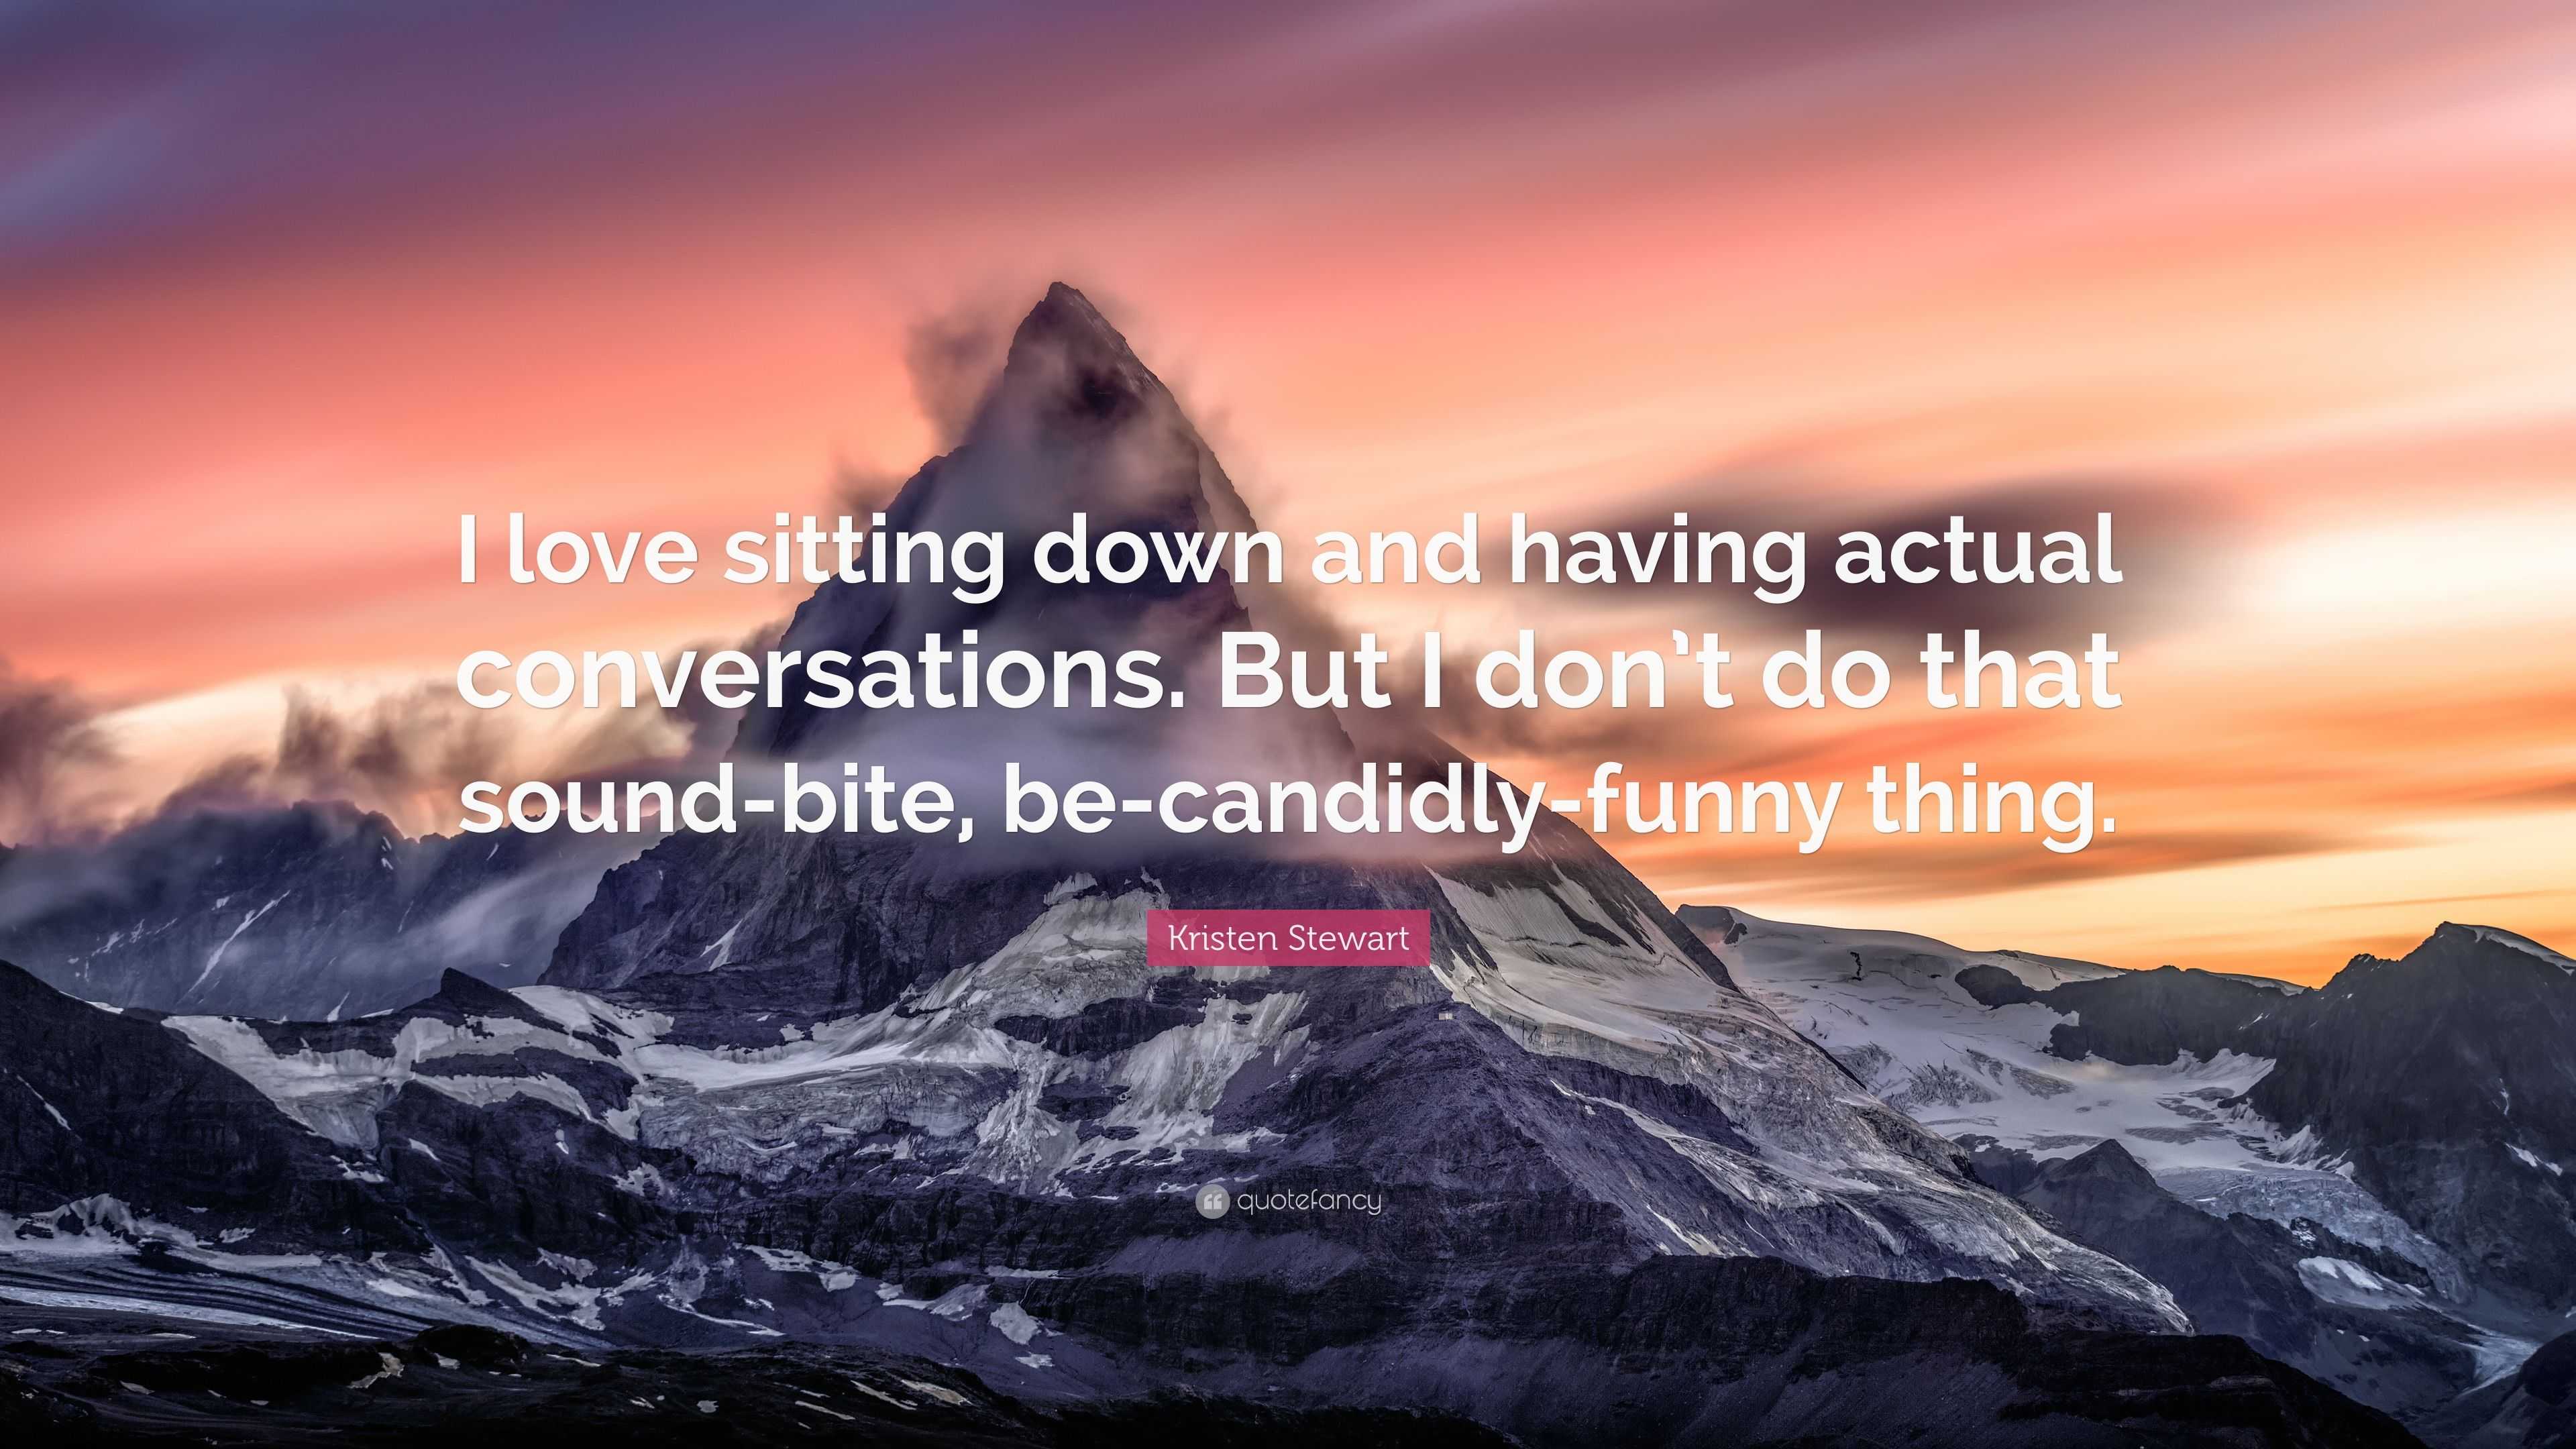 Kristen Stewart Quote: “I love sitting down and having actual  conversations. But I don't do